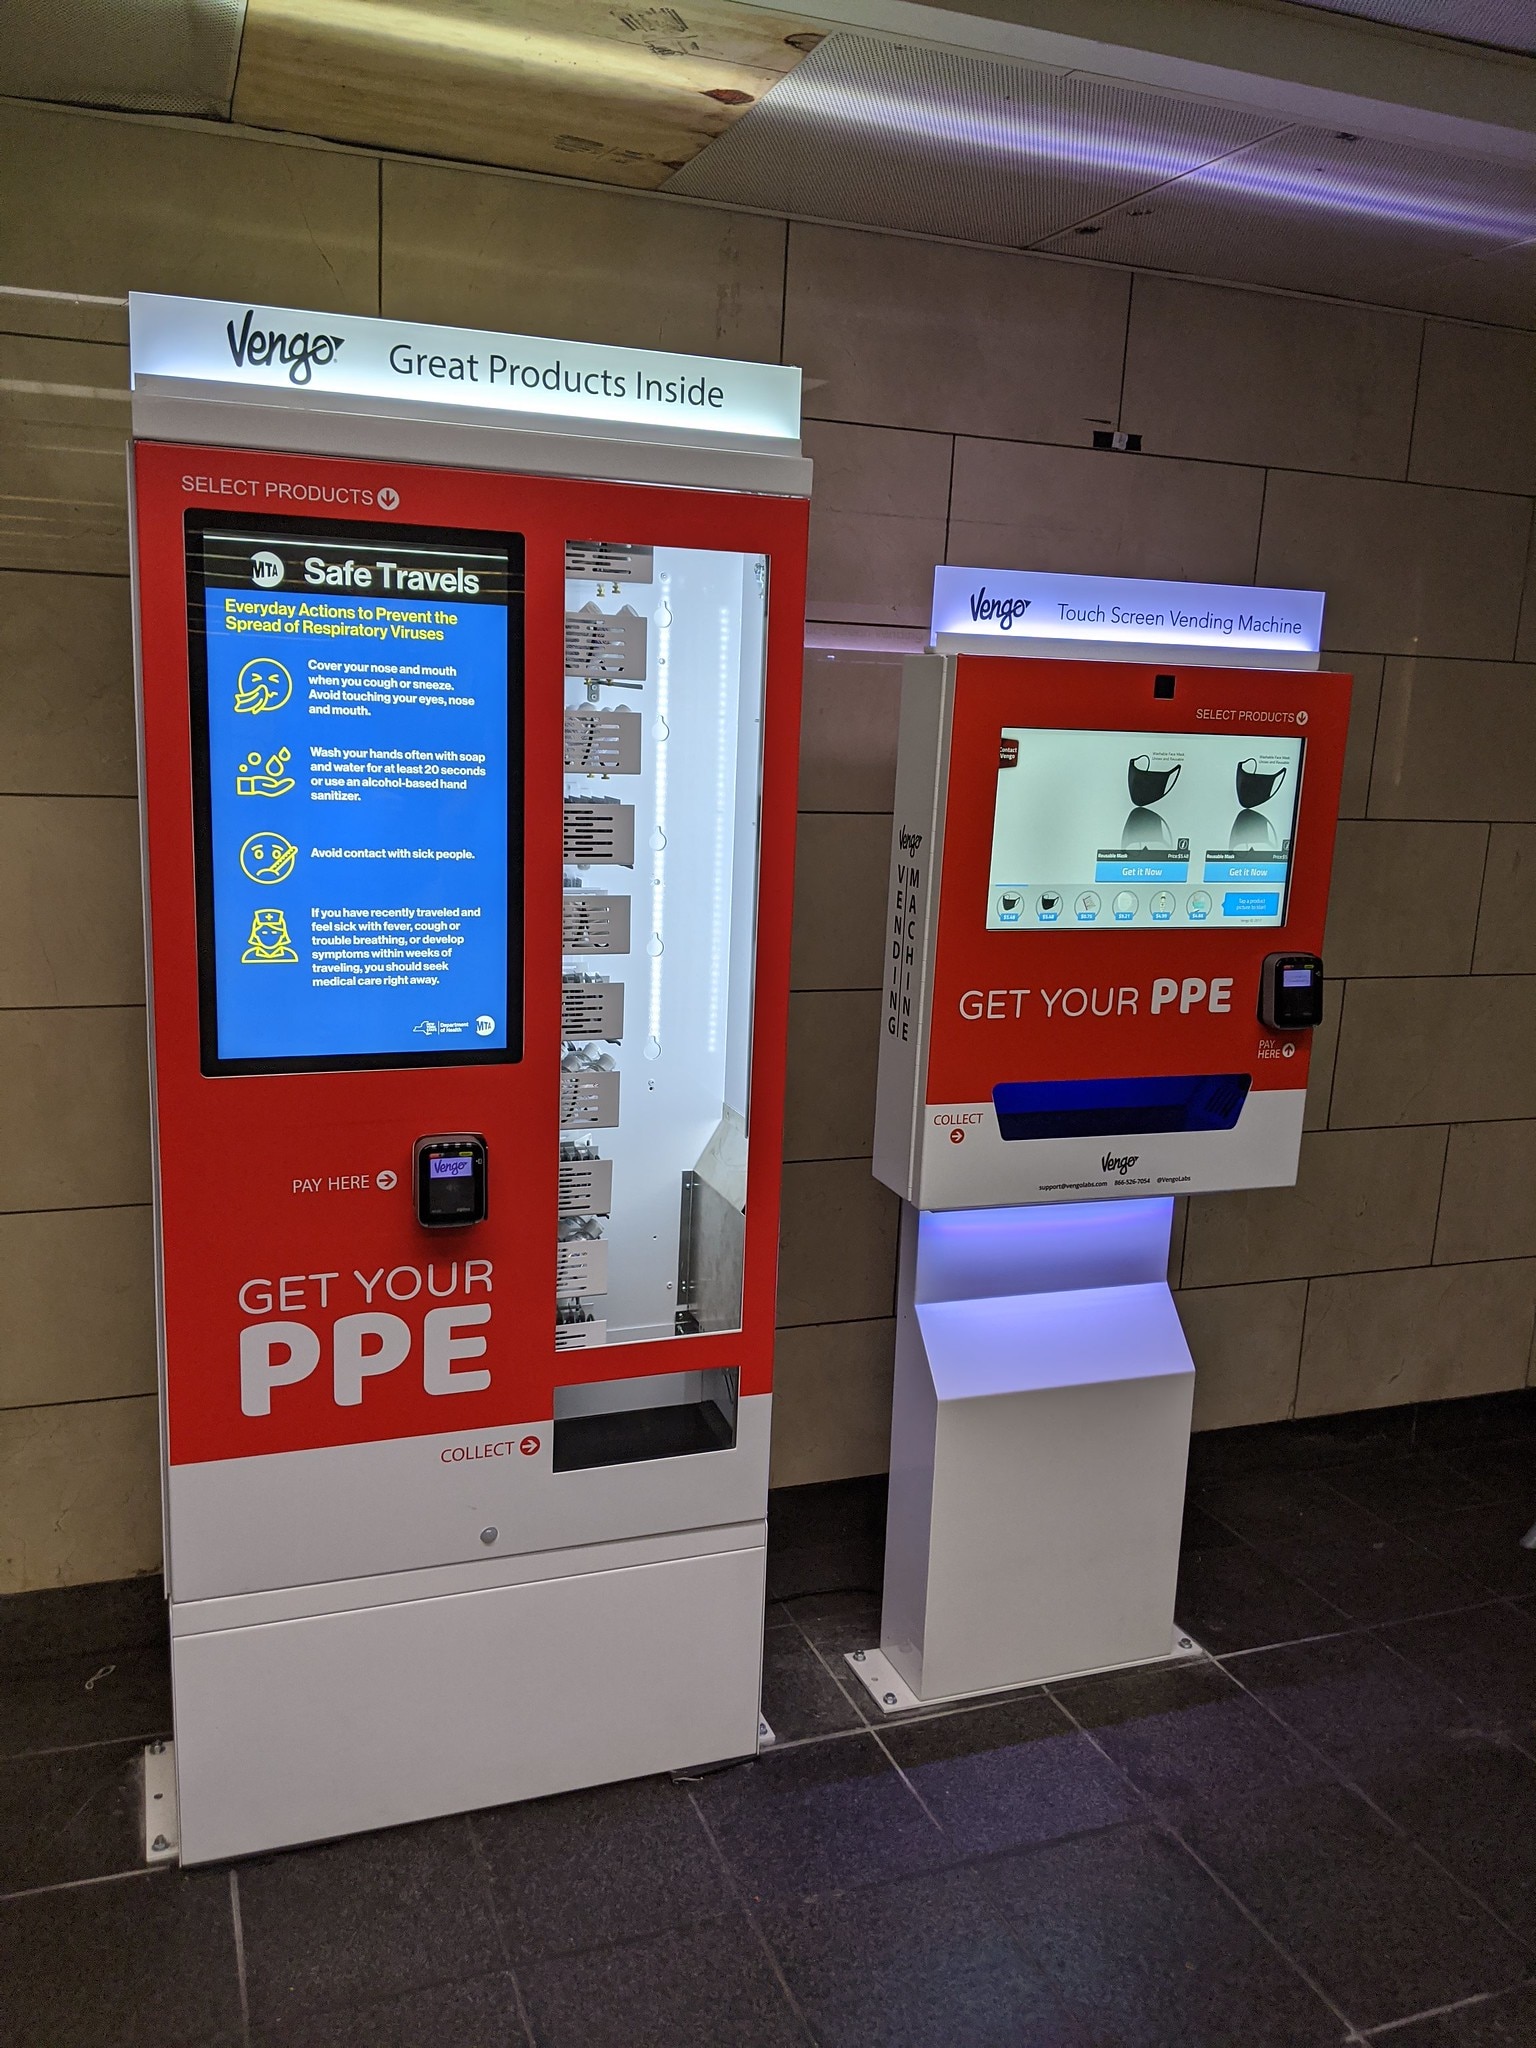 LIRR Launches PPE Vending Machines at Penn Station